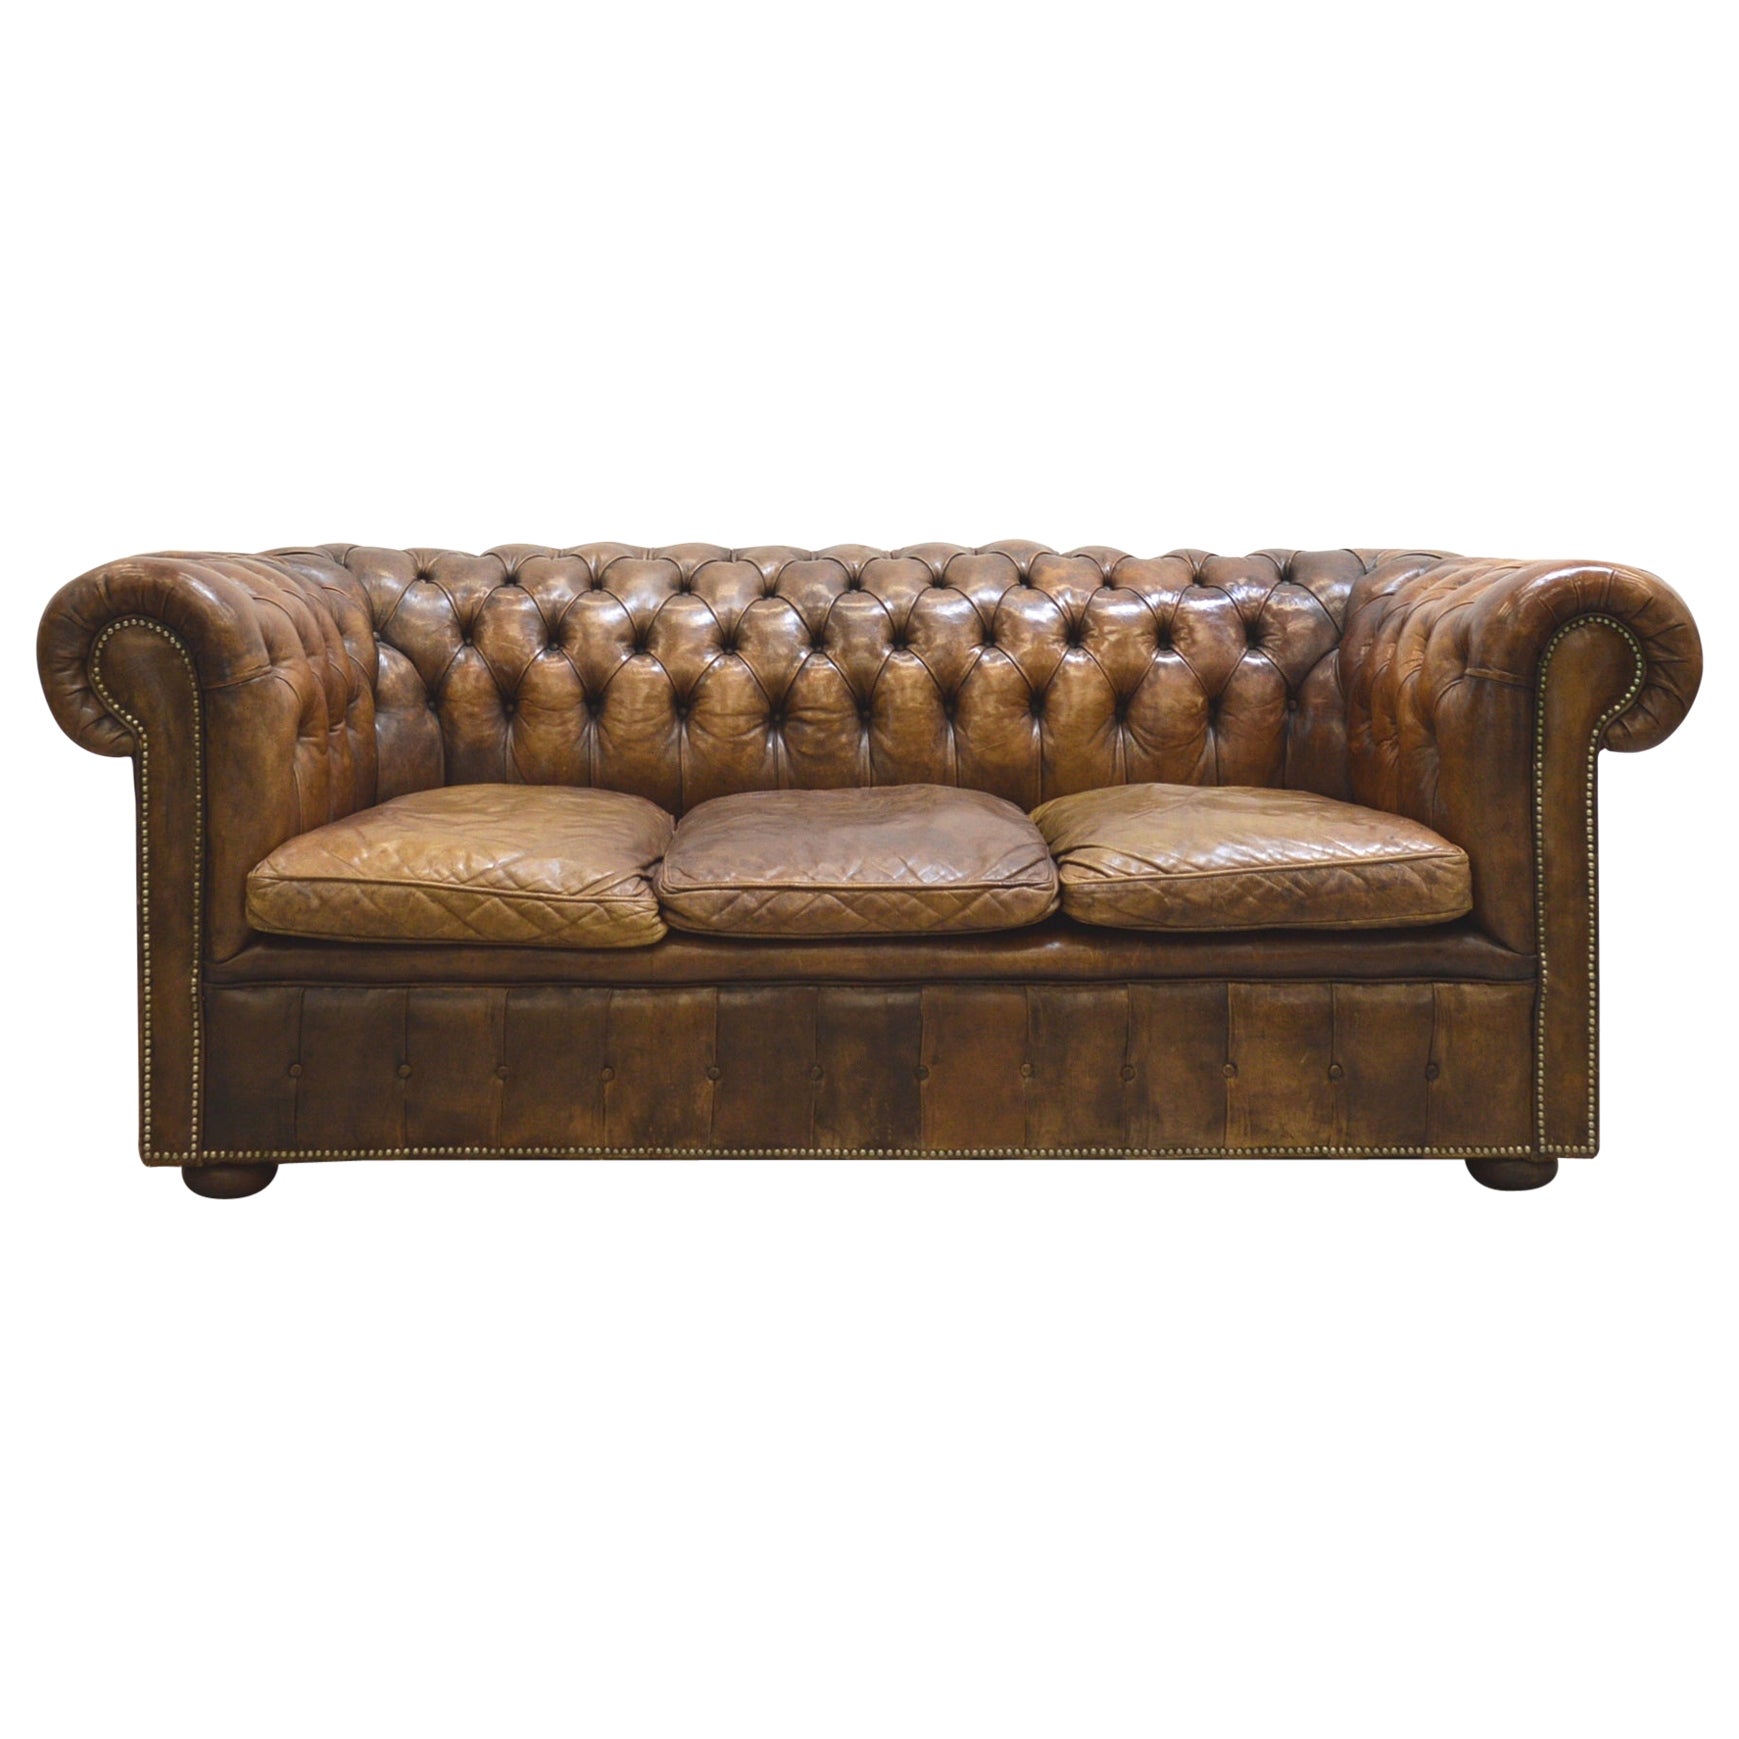 Fine Vintage Antique Chesterfield Club Sofa Hand Dyed, 1930s For Sale